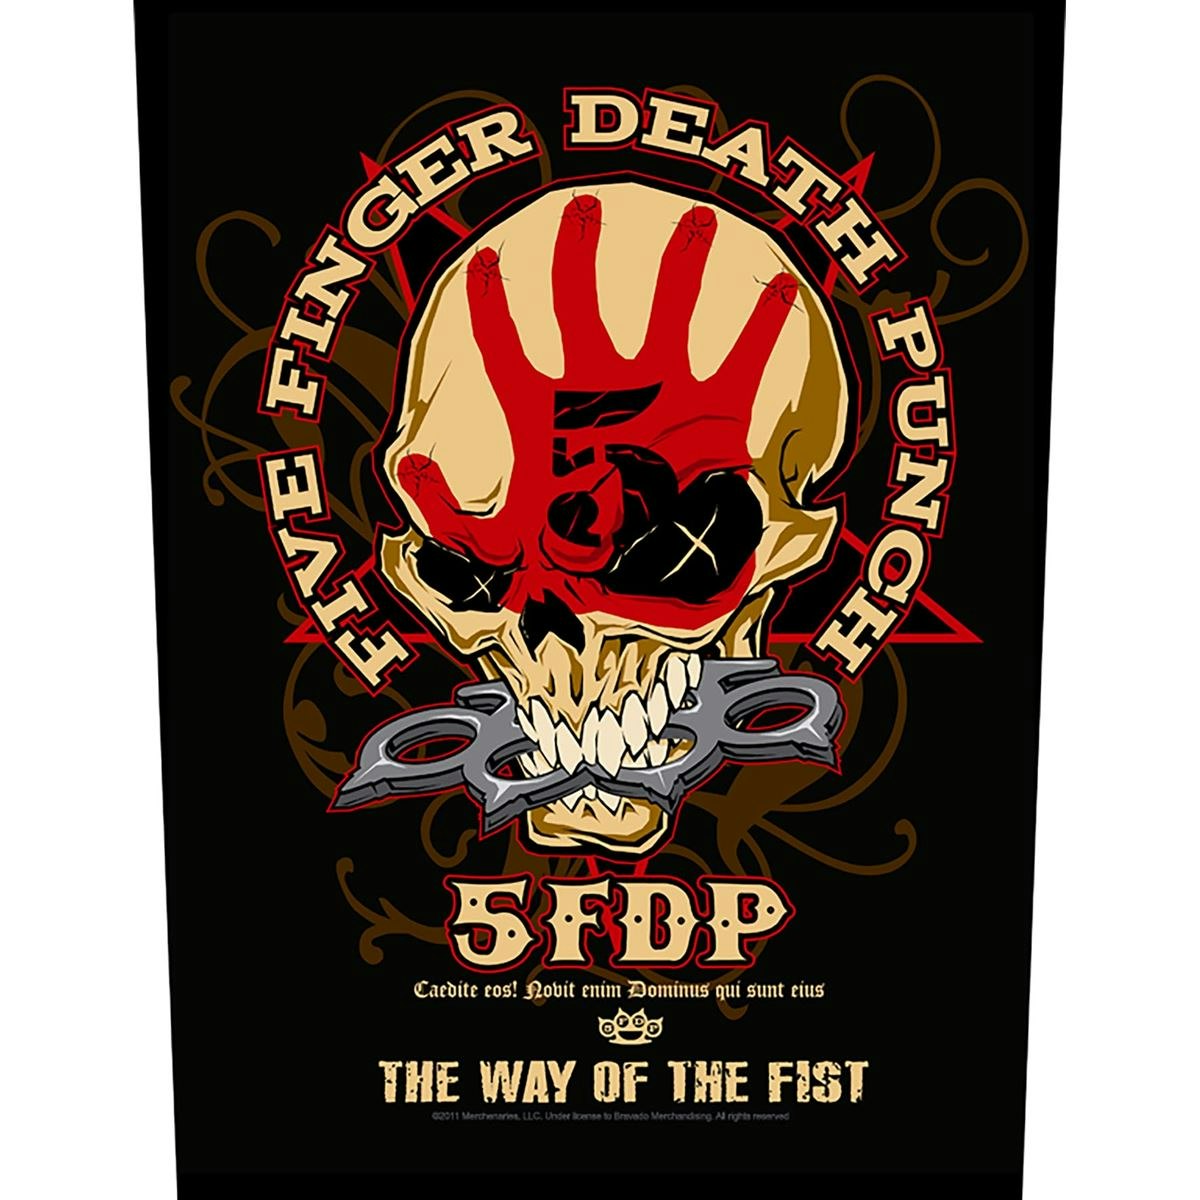 FIVE FINGER DEATH PUNCH - WAY OF THE FIST  Backpatch